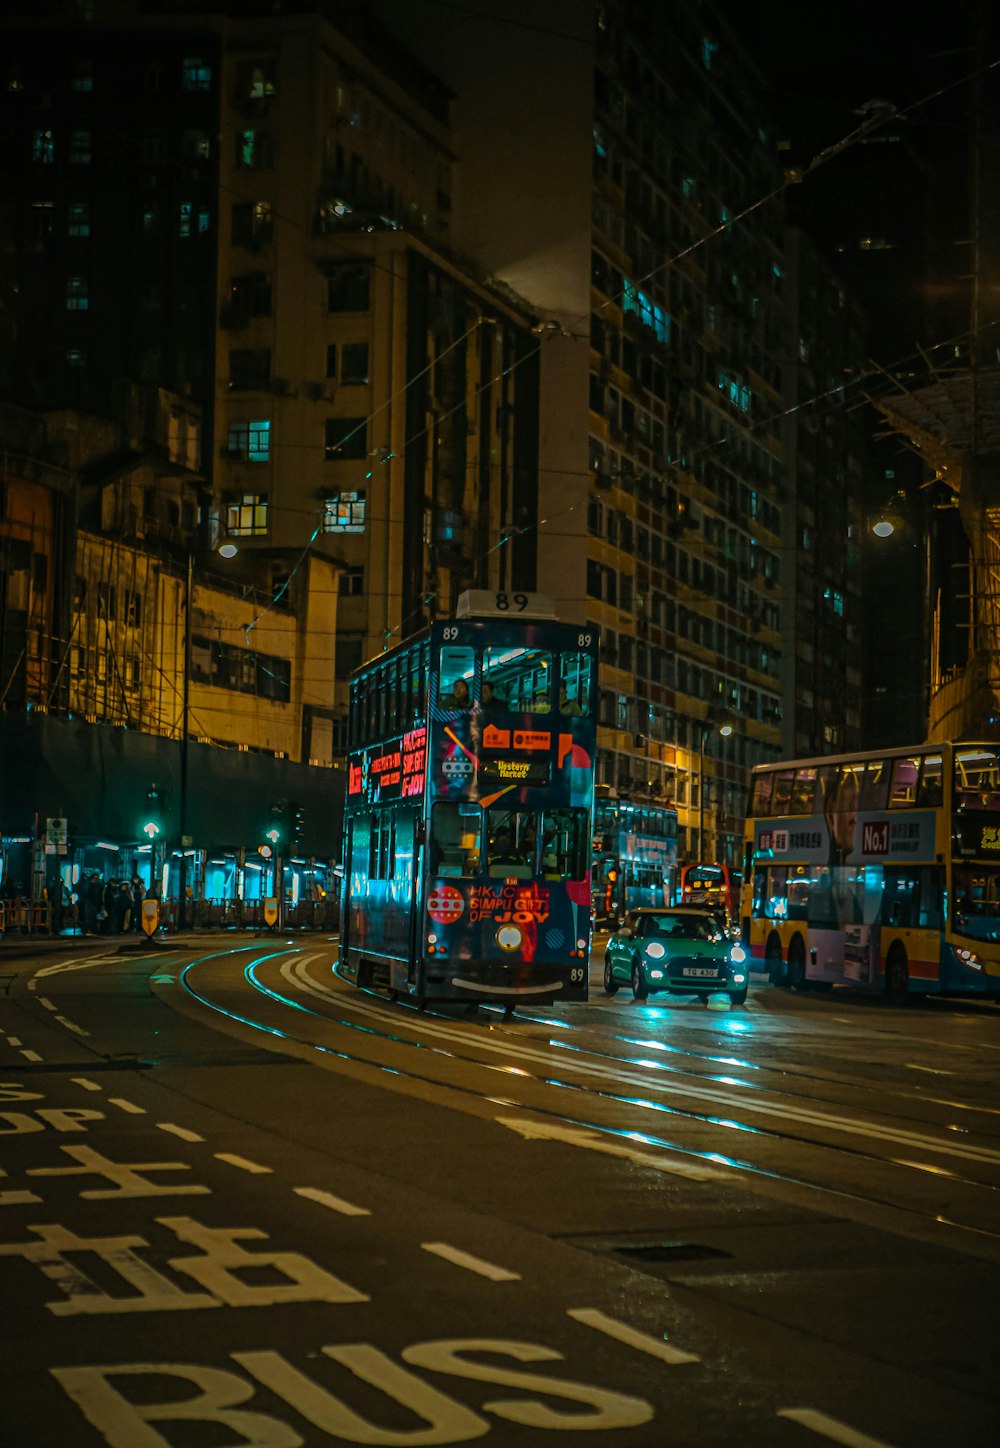 a double decker bus on a city street at night